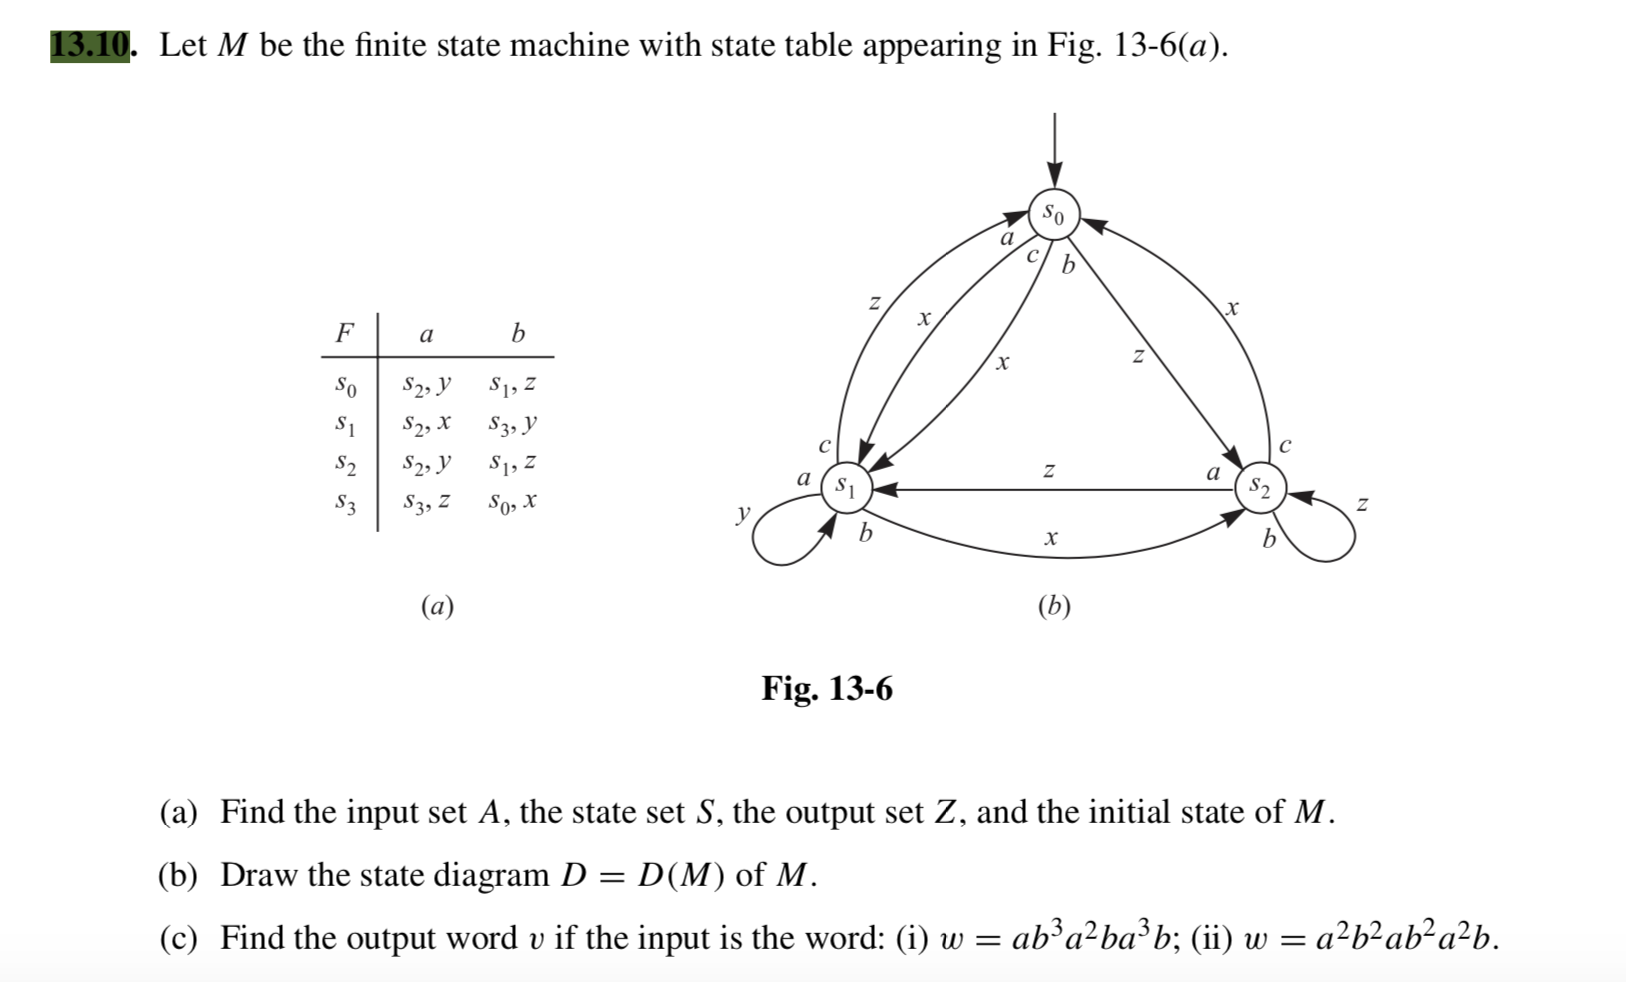 Let M be the finite state machine with state table appearing in Fig. 13-6(a).
So
F
a
b
So
S2, y
S1, Z
S1
S2, X S3, y
S1, z
So, x
S2
S2, y
a
S3
S3, z
b
(a)
(b)
Fig. 13-6
(a) Find the input set A, the state set S, the output set Z, and the initial state of M.
(b) Draw the state diagram D = D(M) of M.
